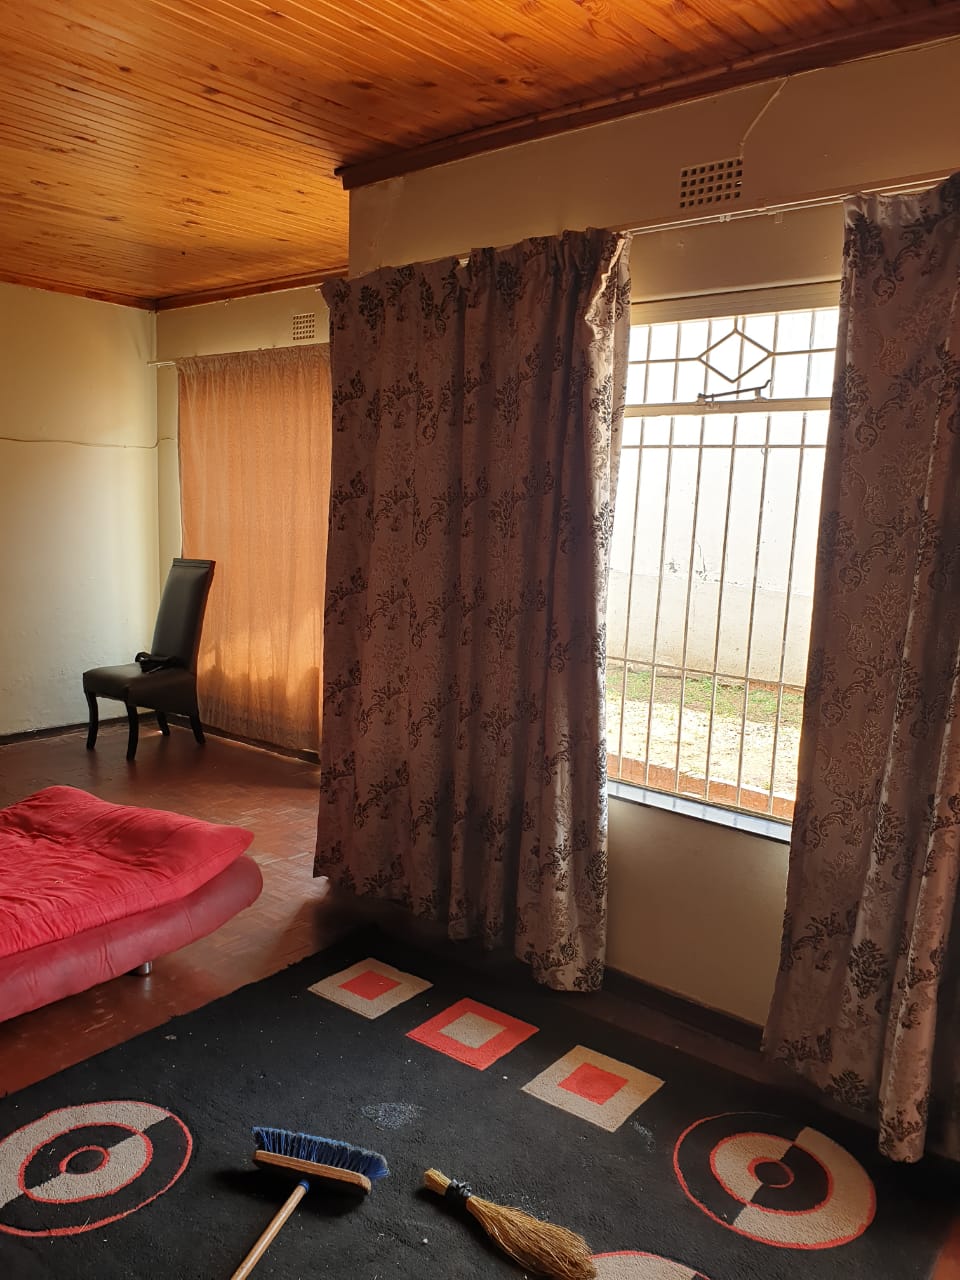 3 bedroom House to let in Bez valley